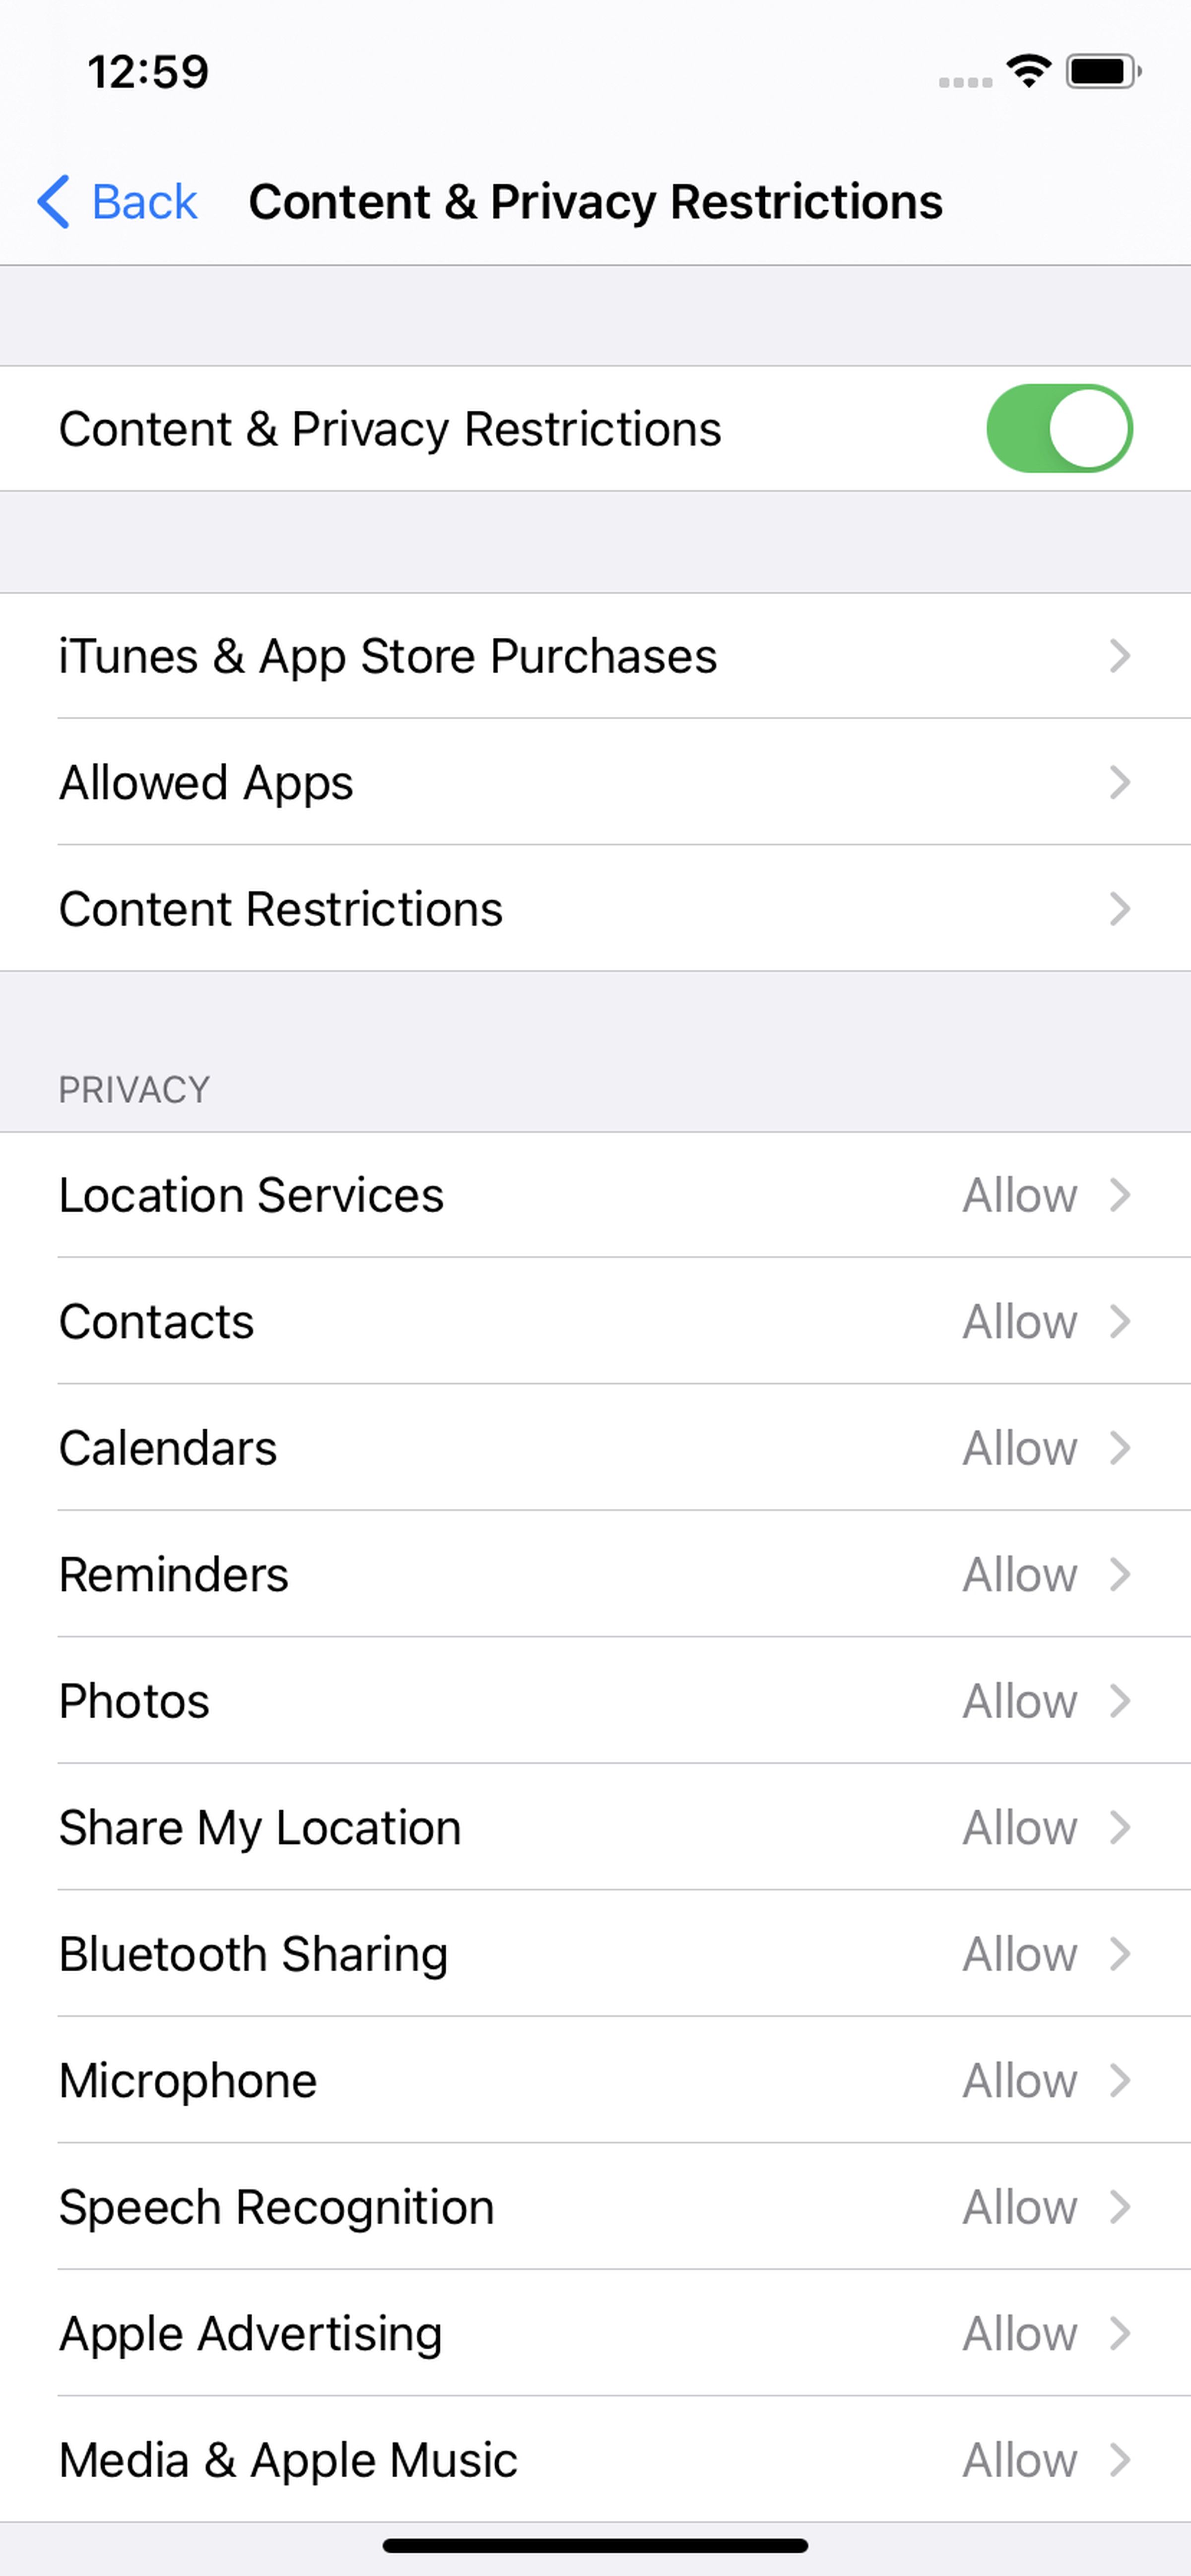 “Content &amp; Privacy Restrictions” lets you place limitations on a number of apps